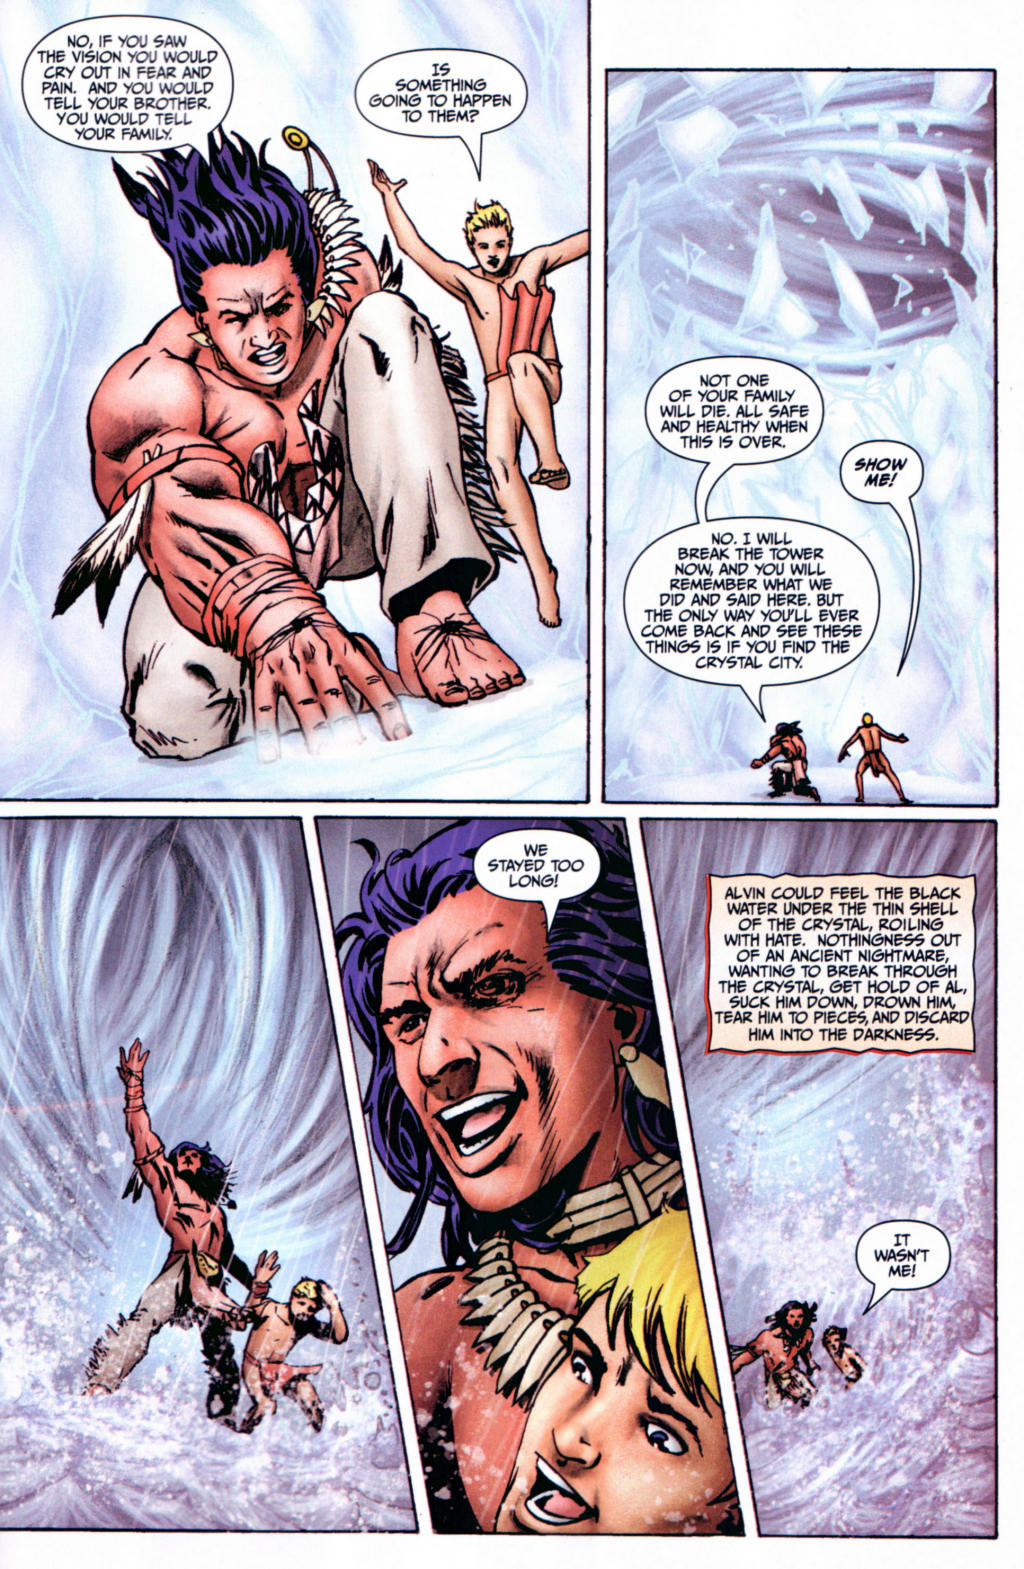 Red Prophet: The Tales of Alvin Maker issue 6 - Page 23